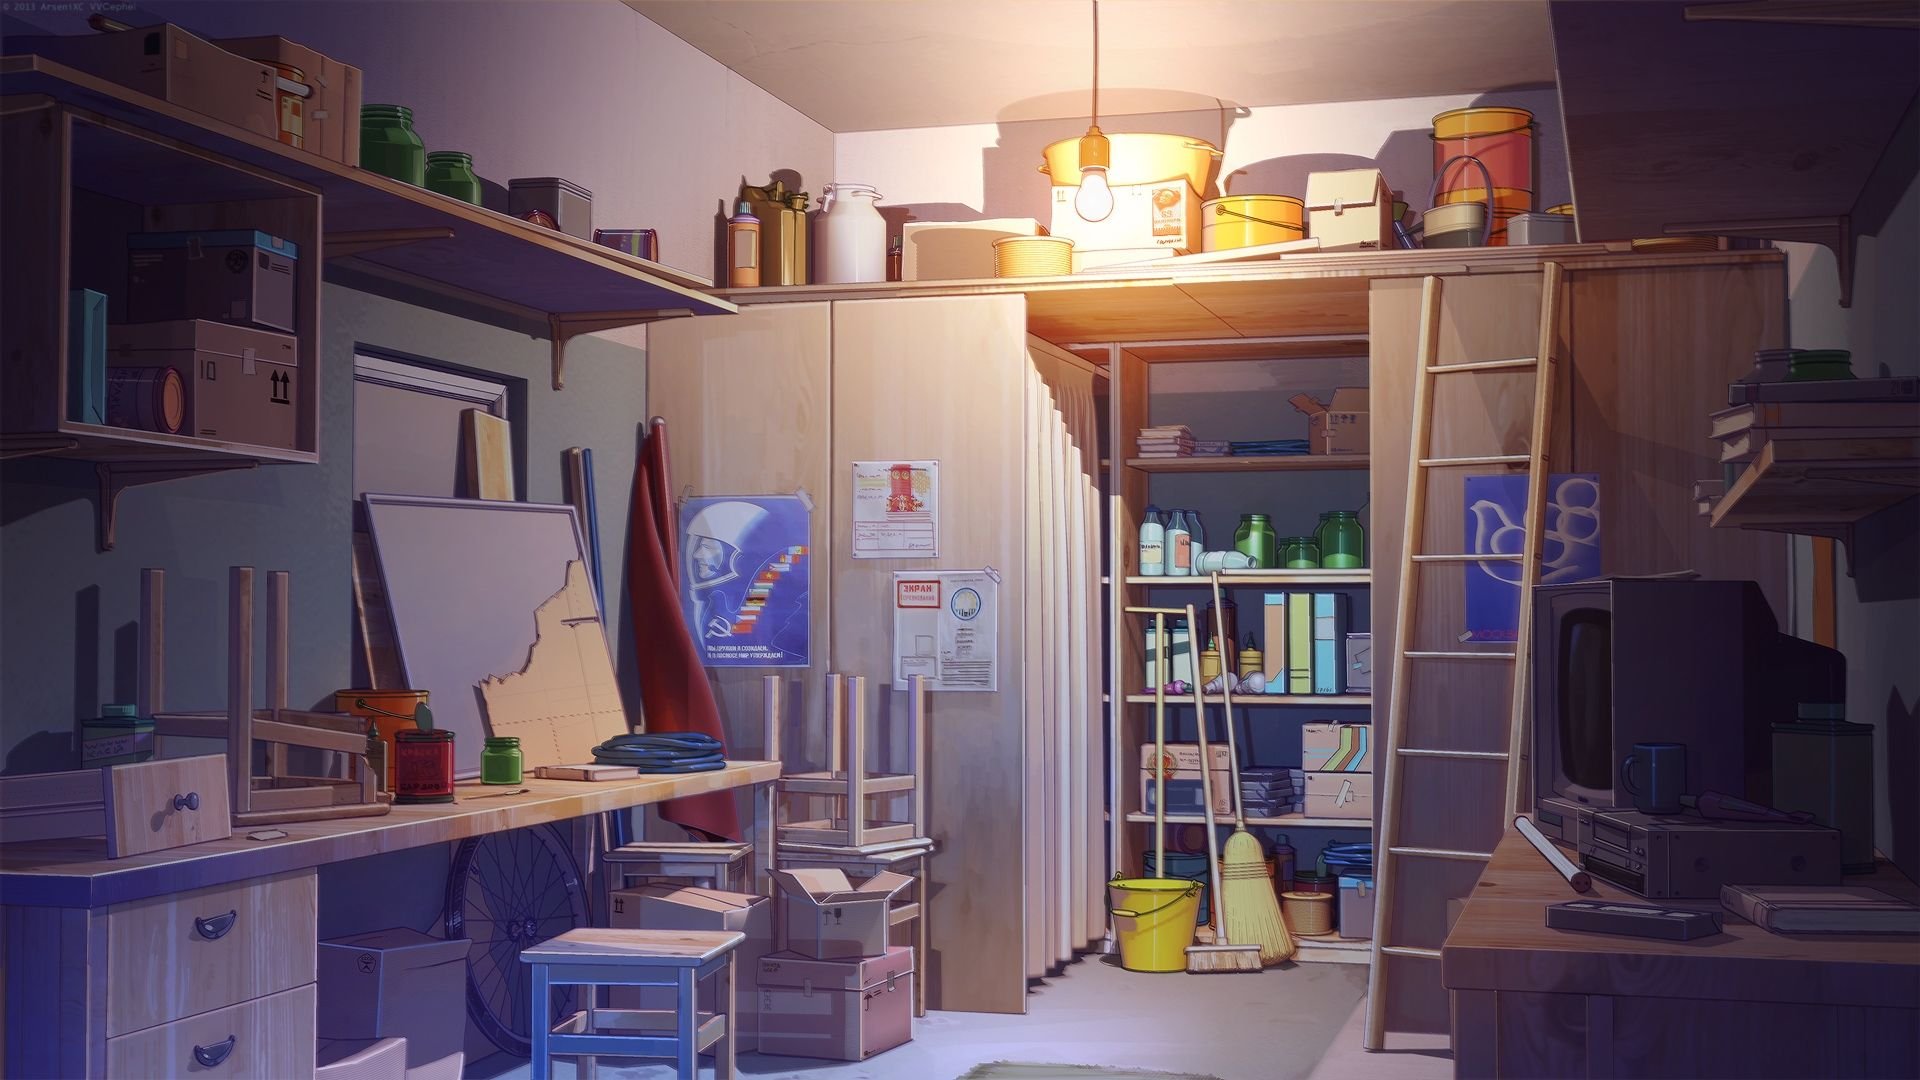 A sloppy bedroom (Anime) - Finished Projects - Blender Artists Community